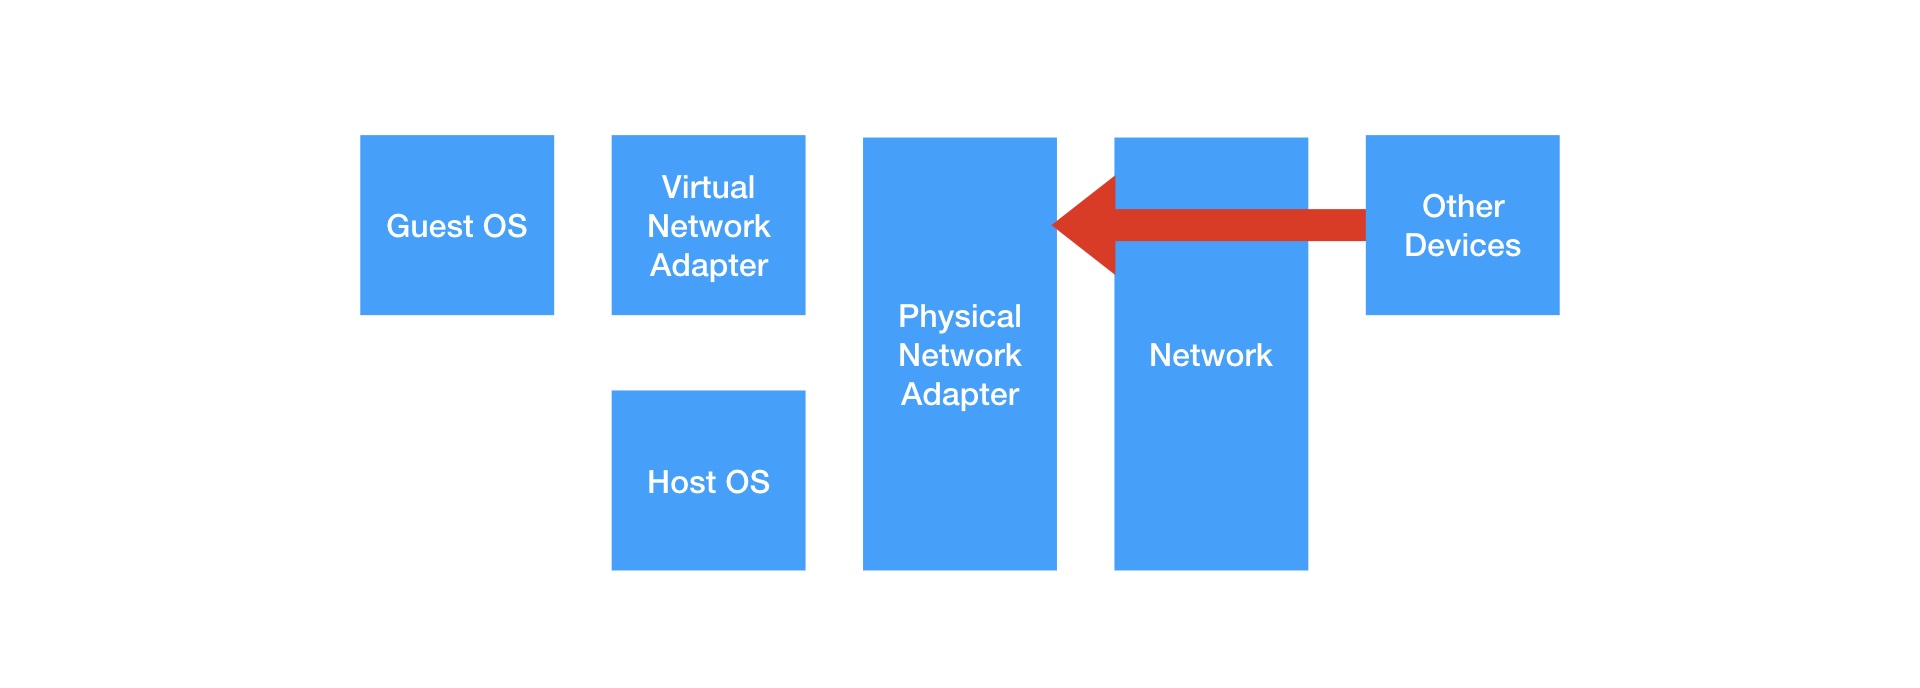 Private Networking prevents access to the VM